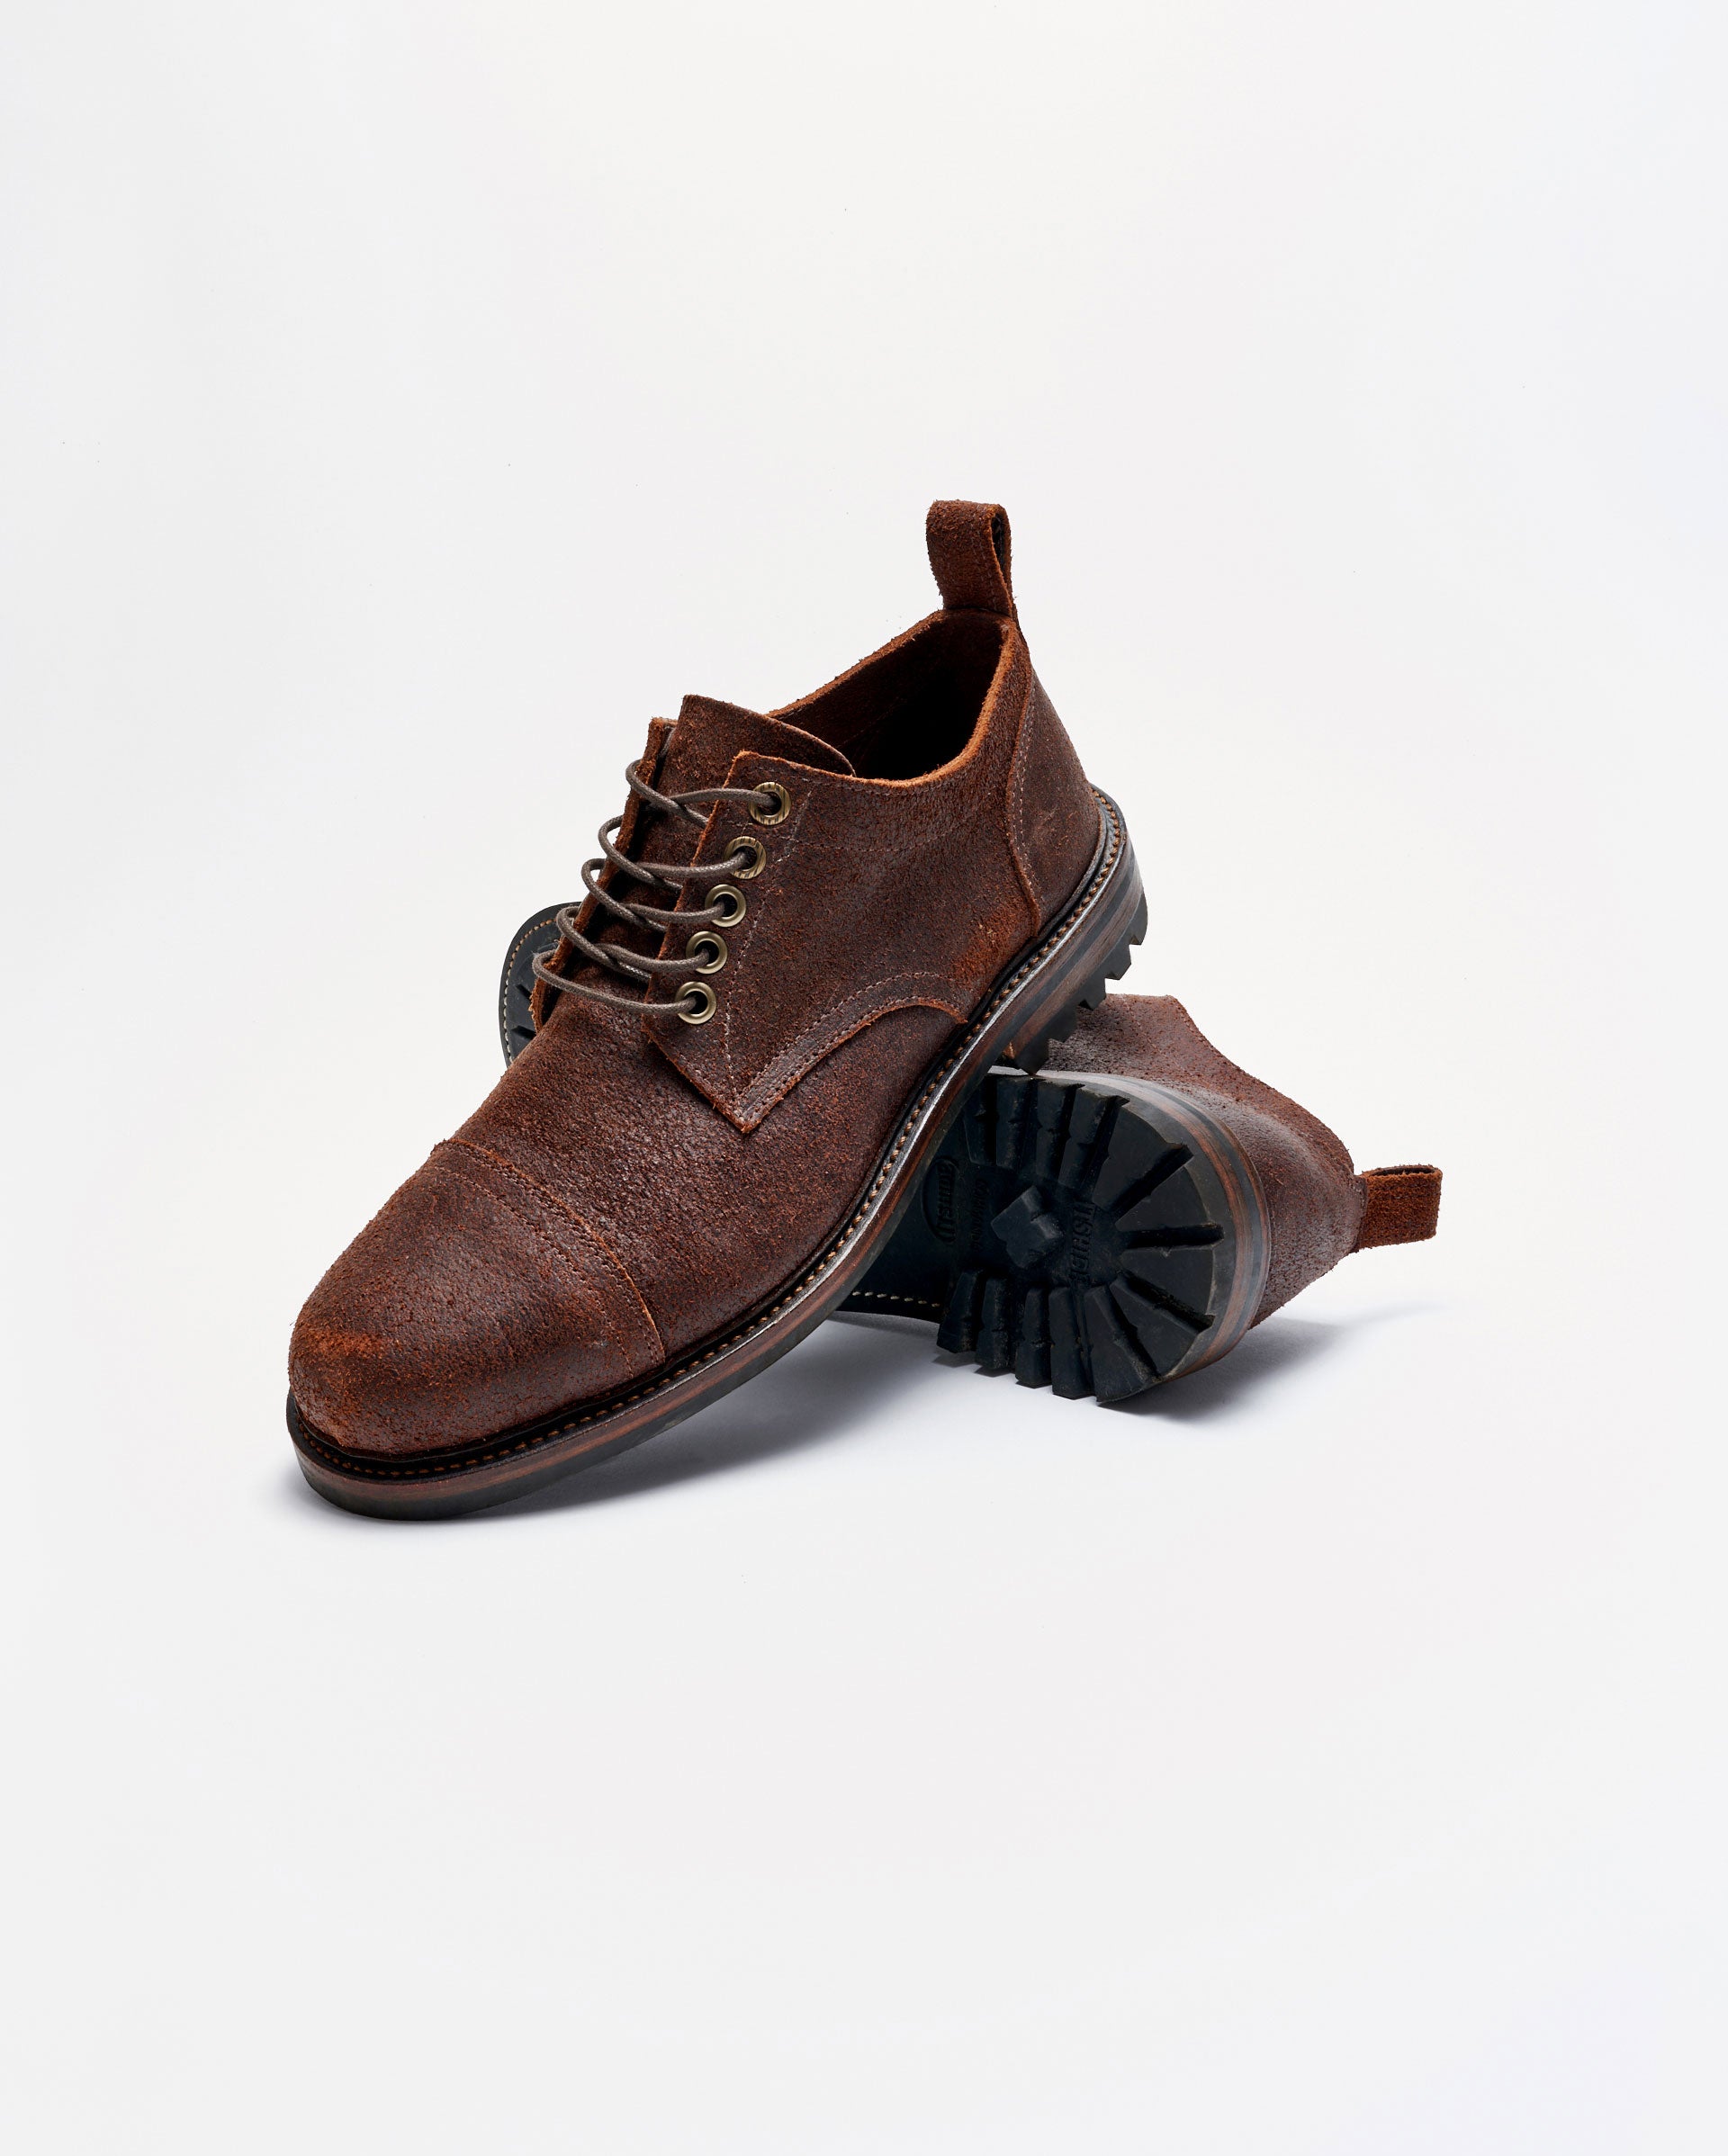 31 Most Expensive Shoes for Men [2023 Buyer's Guide]  Expensive mens shoes,  Dress shoes men, Most expensive shoes